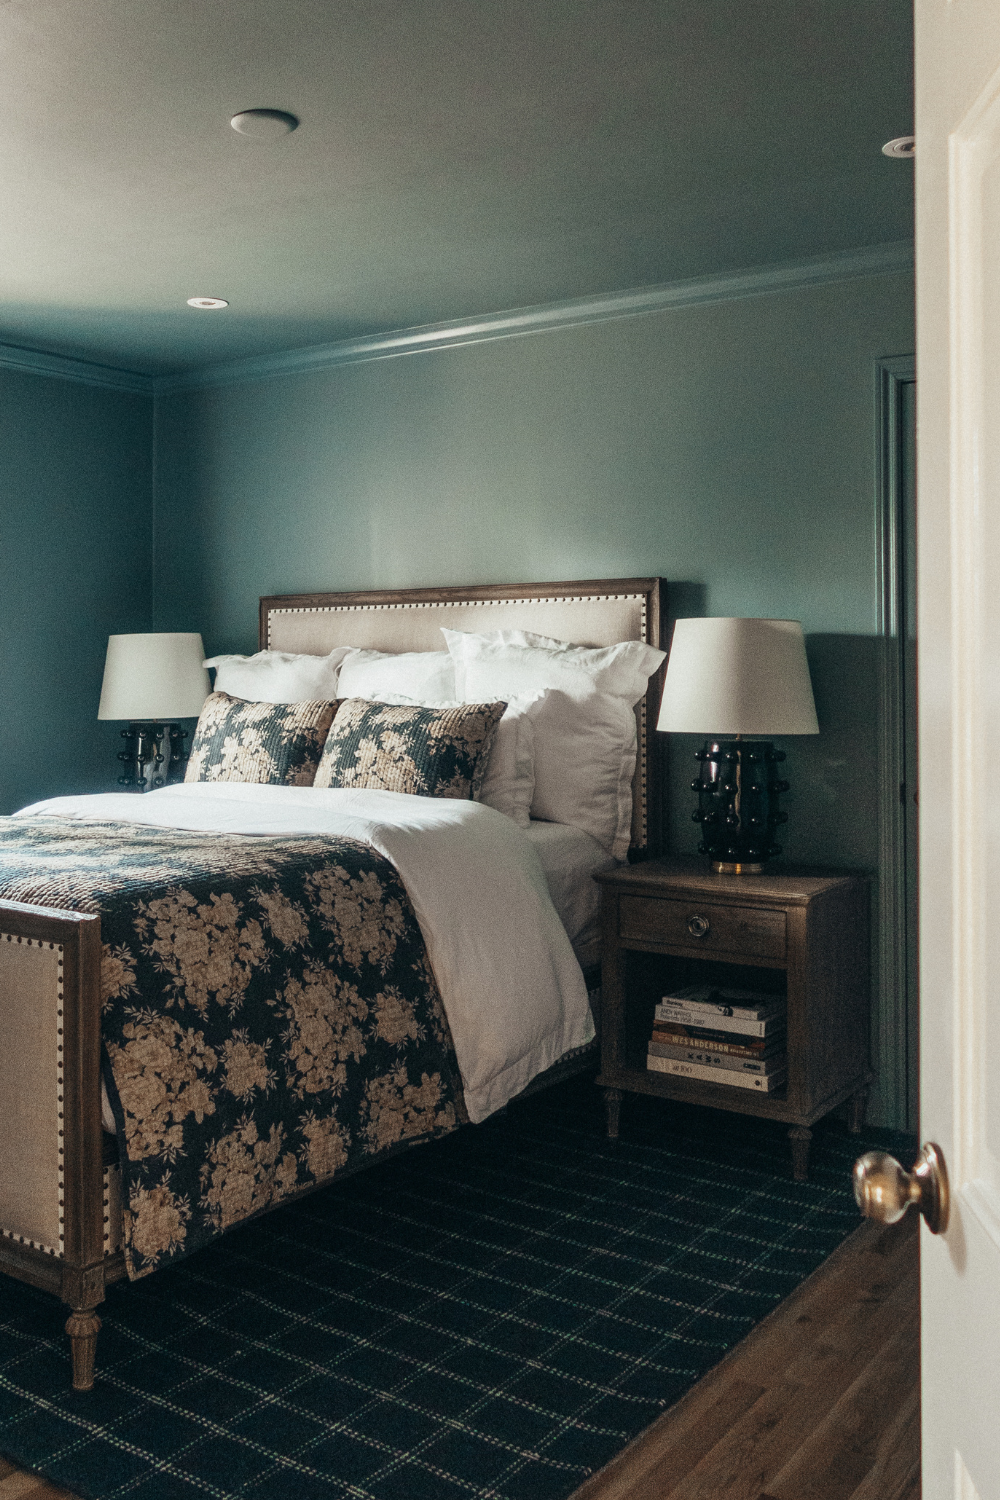 Guest Bedroom Transformation Before and After, Elegant Guest Bedroom Decor Inspiration, Cozy Bedding and Stylish Design,Guest Bedroom Makeover Ideas, Chic Interior Design for Guest Bedroom, Decorating Tips for Guest Rooms, Upgrade Ideas for Bedroom Decor, Revealing a Dreamy Guest Room Makeover